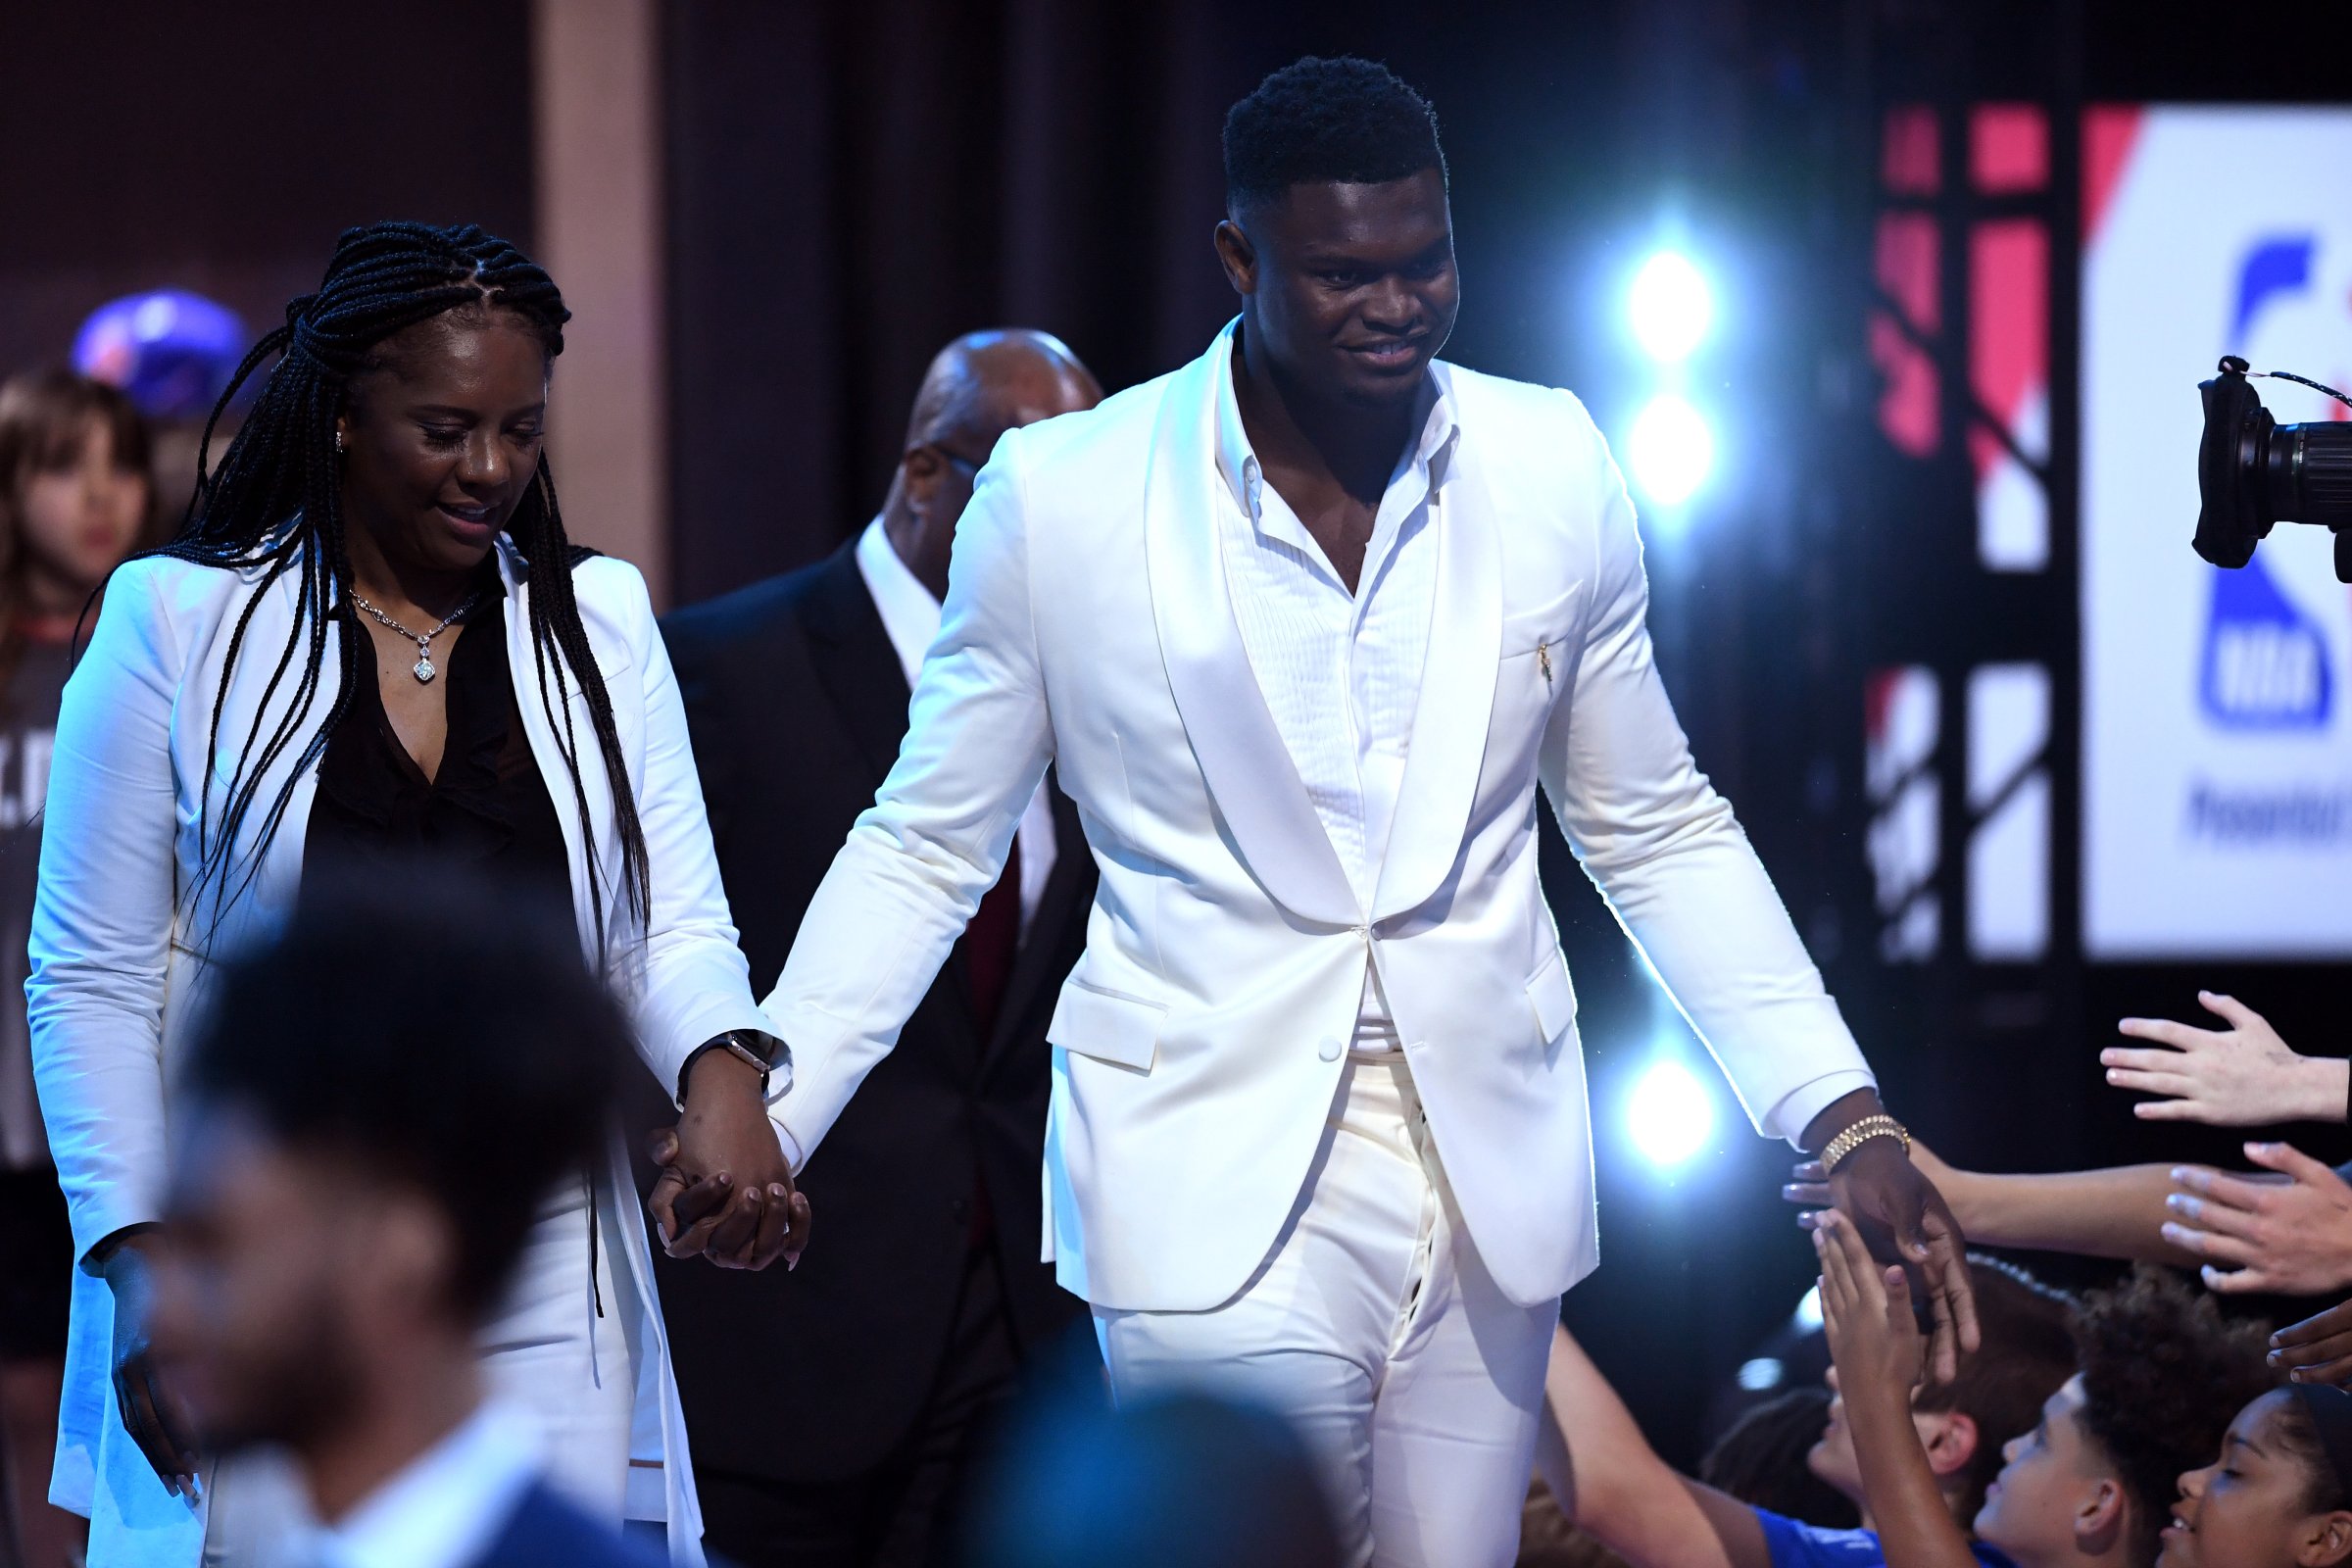 Zion Williamson gives interview at 2019 NBA Draft